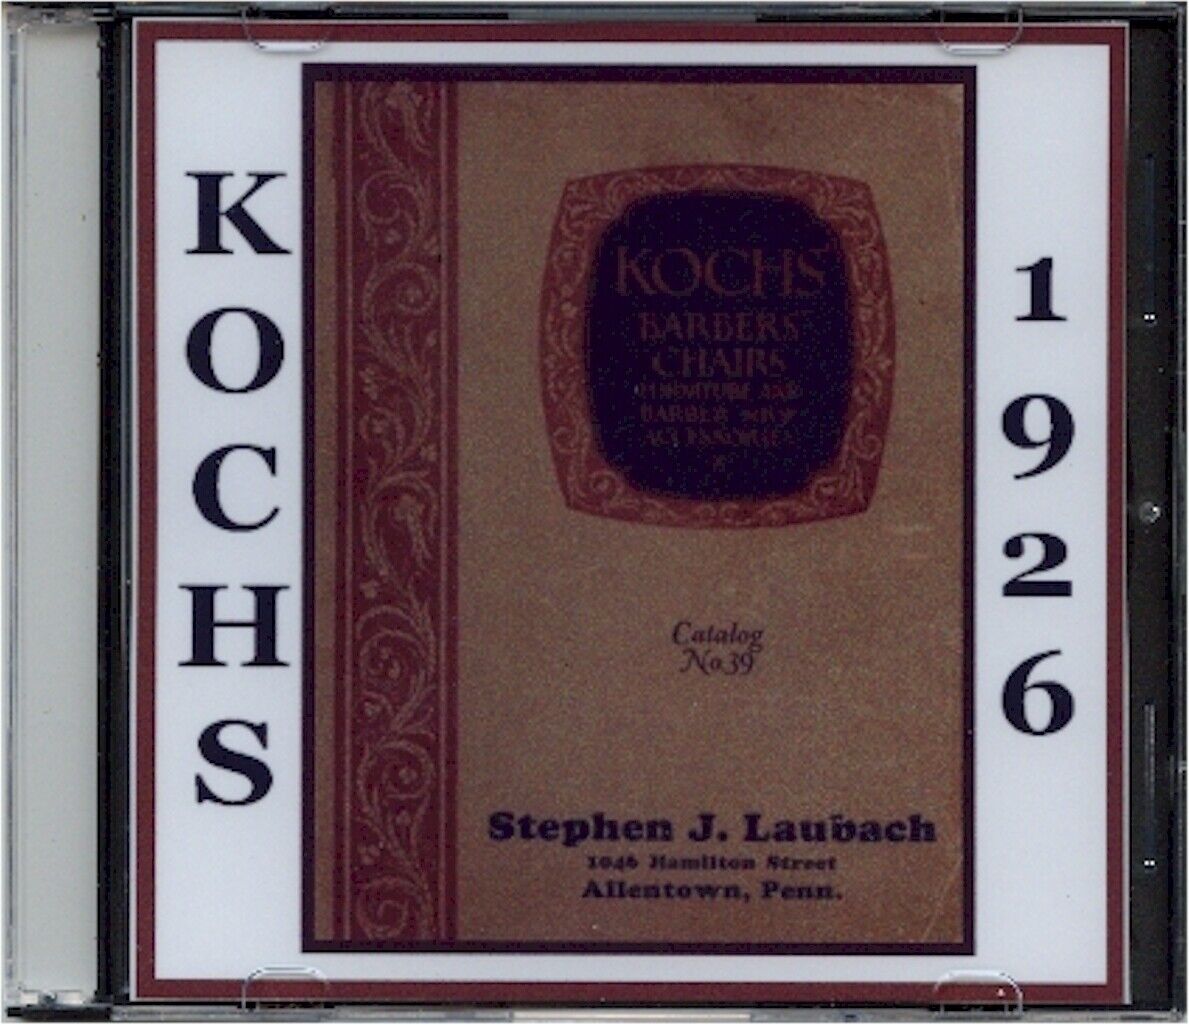 1926 Koch's  Barber Chairs  Catalog #39 on CD - chairs. poles, and more